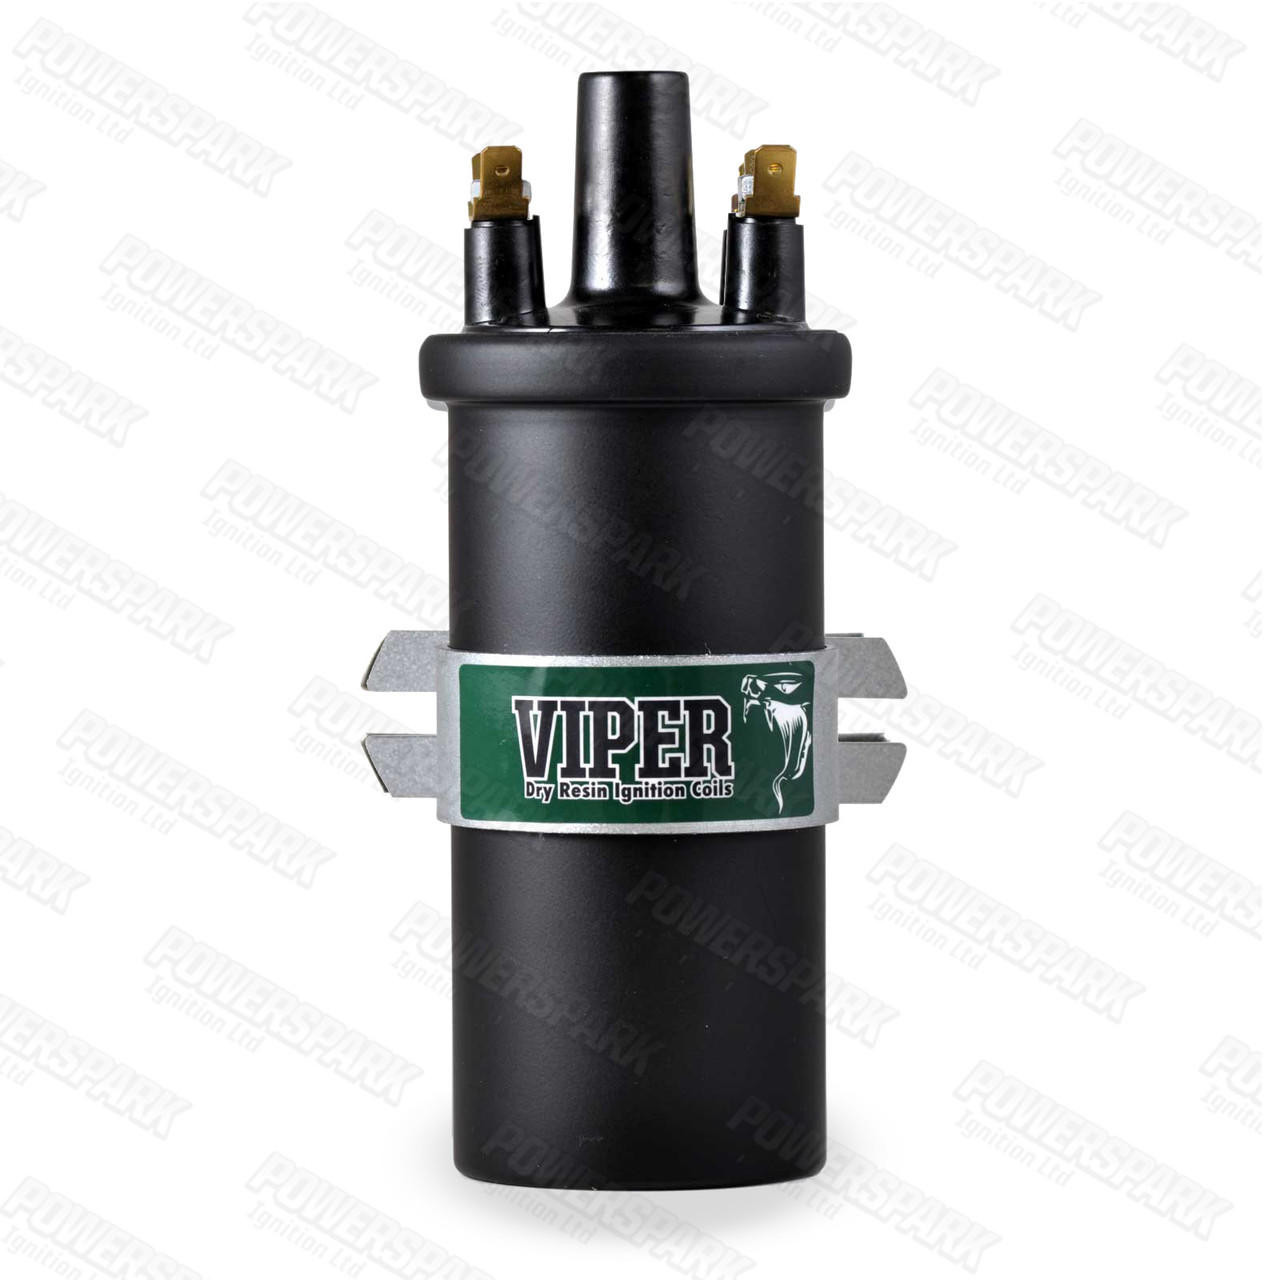  Viper Dry Ignition Coil High Energy replaces Lucas DLB198